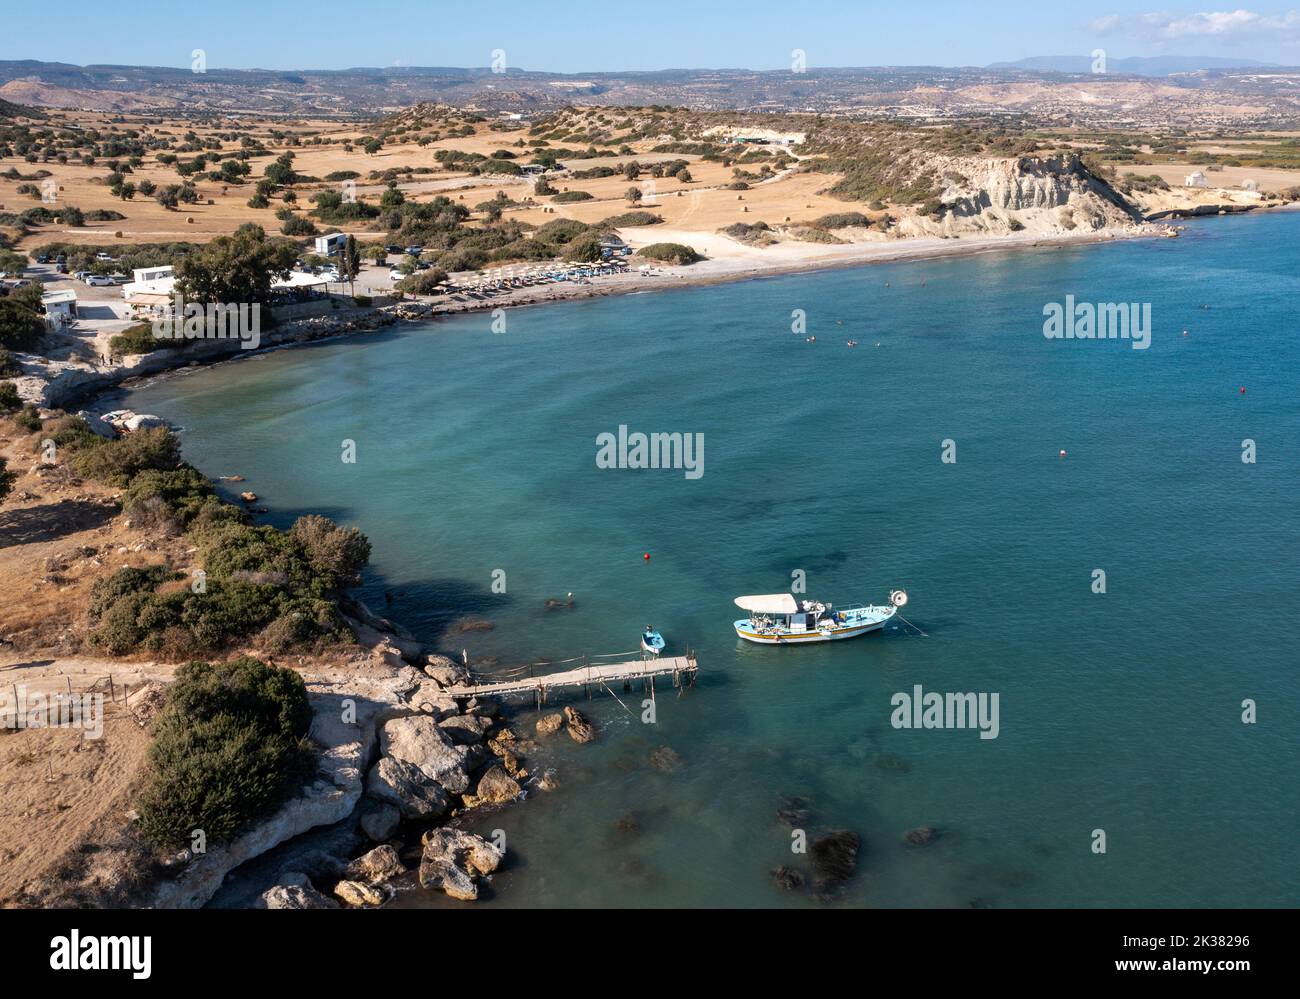 Aerial view of a fishing boat moored in Avdimou Bay, Limassol district Cyprus. Stock Photo